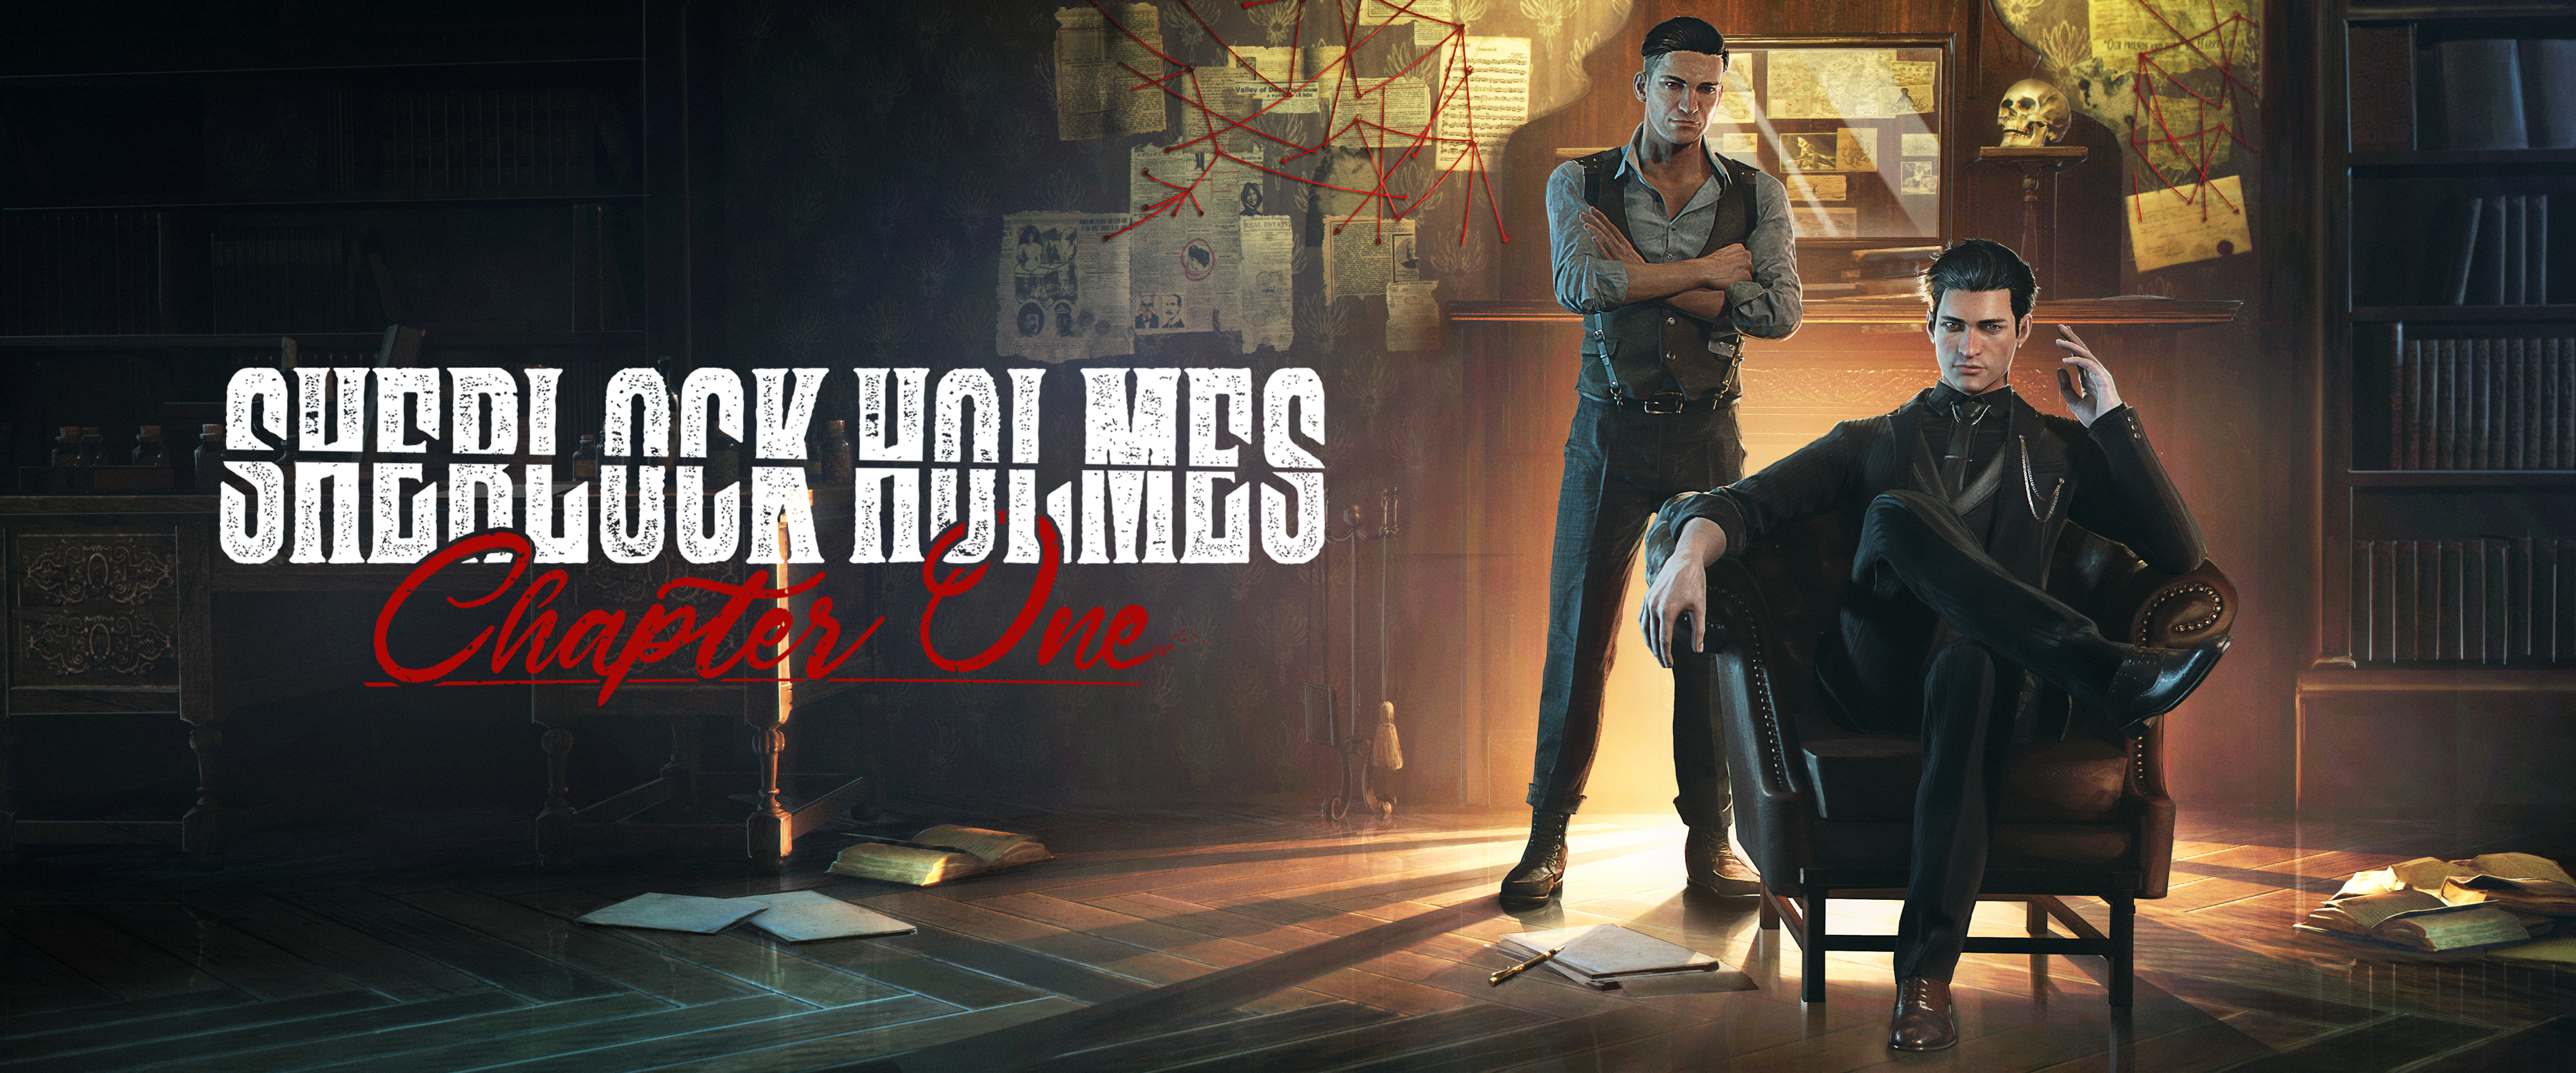 Wallpapers sherlock holmes chapter one 2021 games PS4 games on the desktop